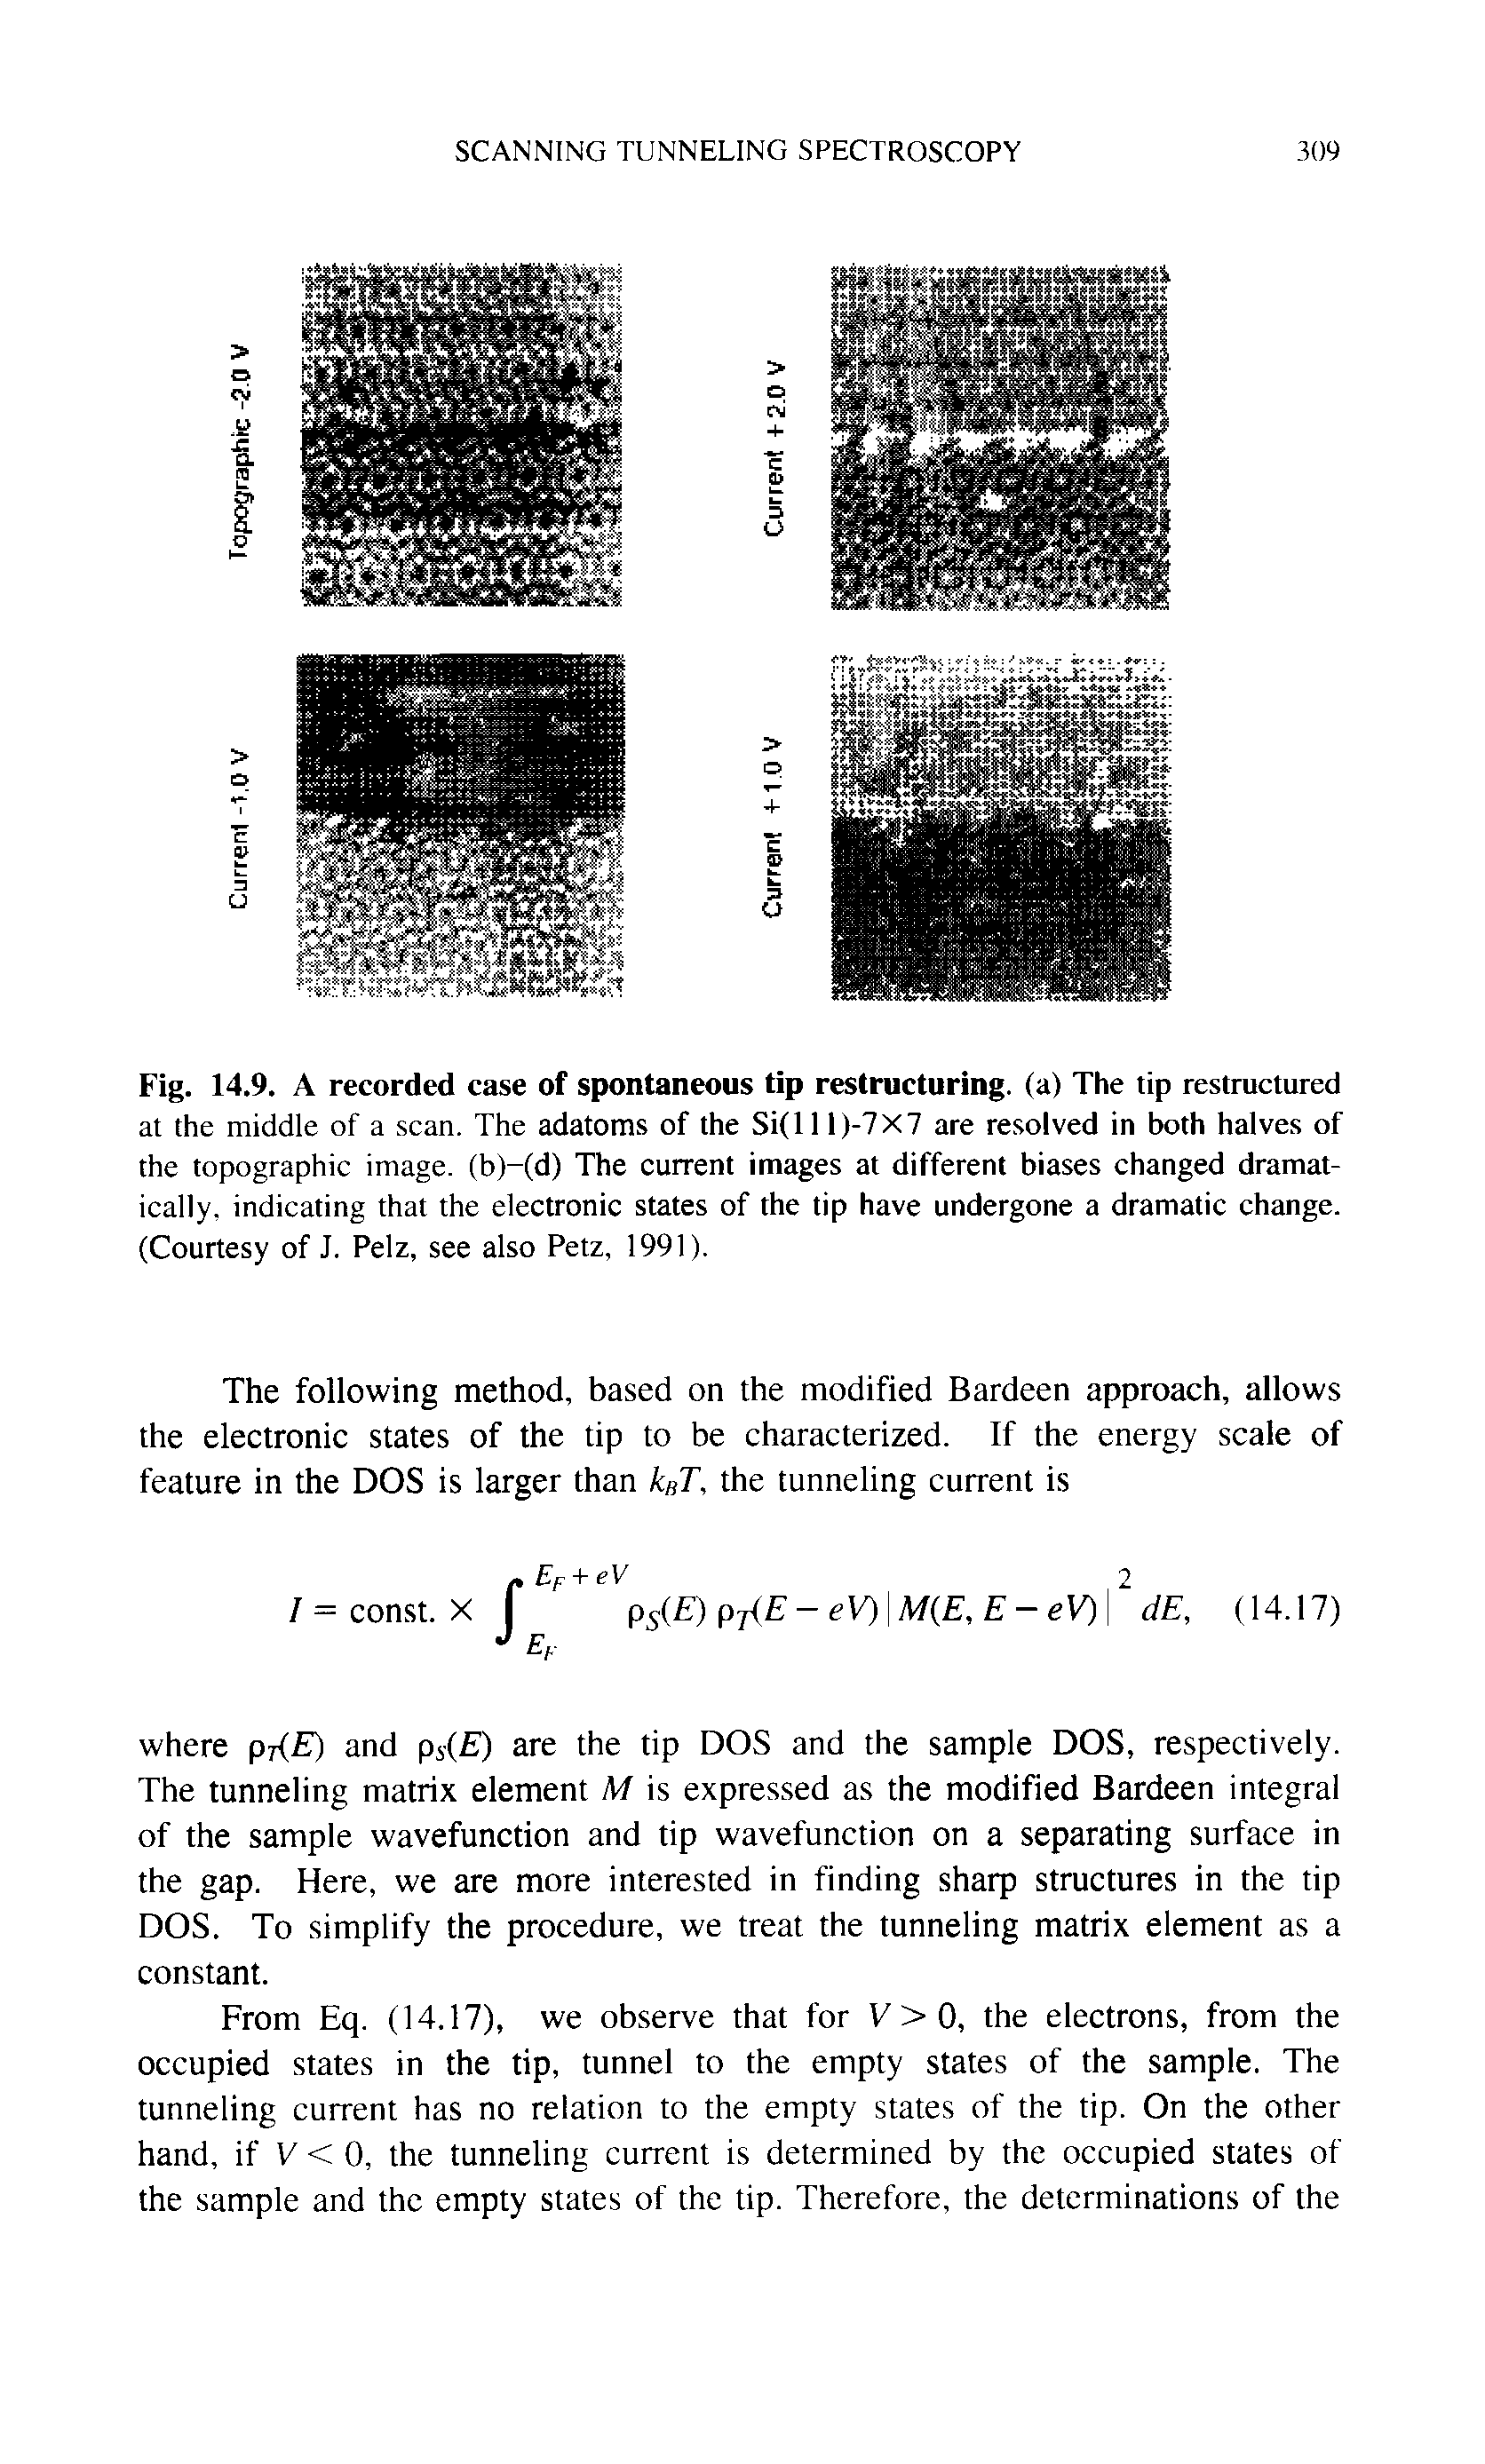 Fig. 14.9. A recorded case of spontaneous tip restructuring, (a) The tip restructured at the middle of a scan. The adatoms of the Si(ll 1)-7X7 are resolved in both halves of the topographic image, (b)-(d) The current images at different biases changed dramatically, indicating that the electronic states of the tip have undergone a dramatic change. (Courtesy of J. Pelz, see also Petz, 1991).